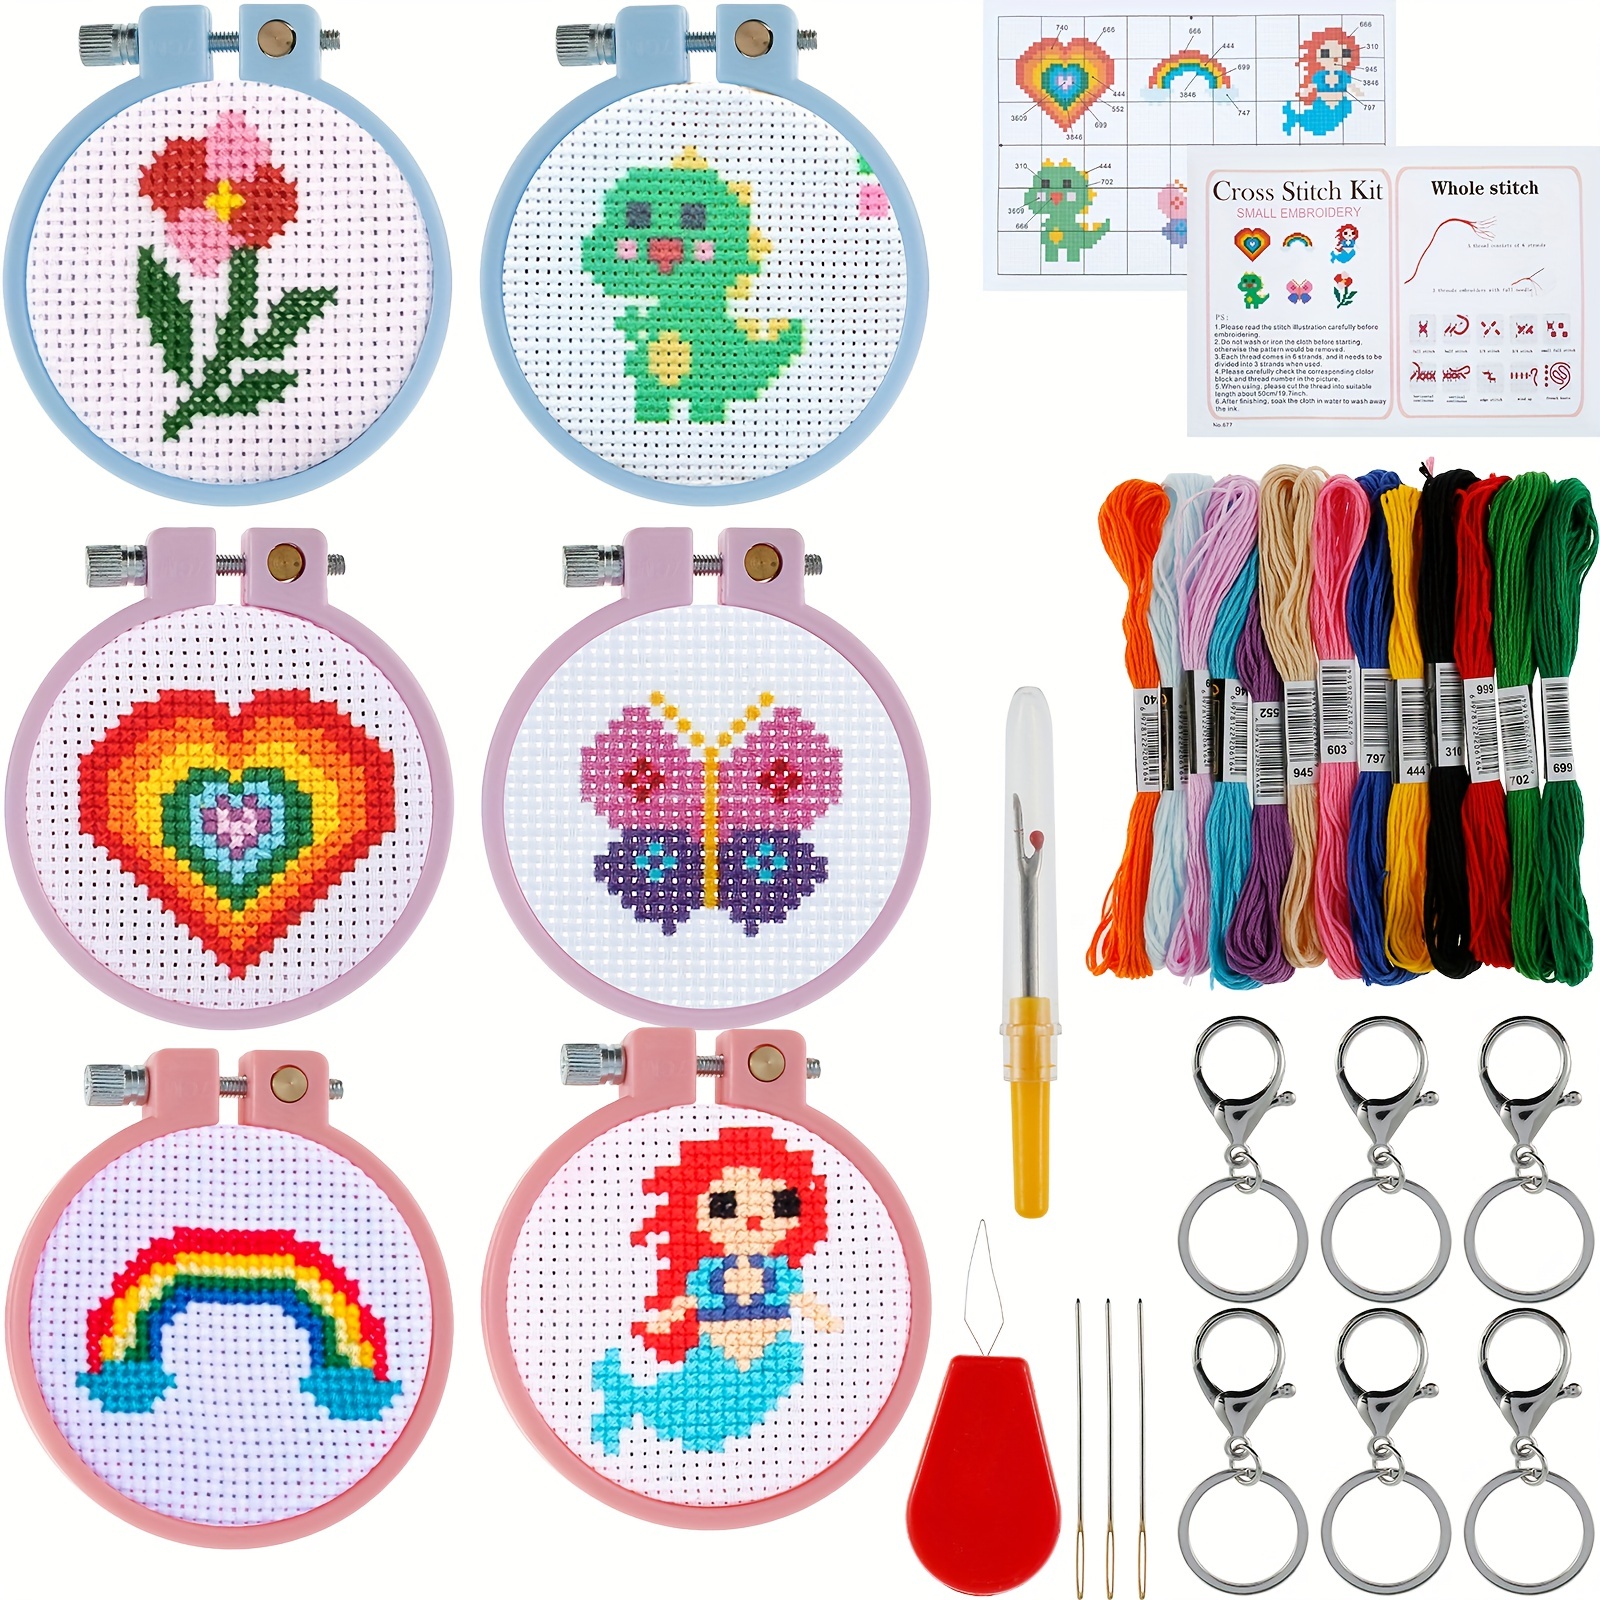 REEWISLY 4 pcs of Embroidery Starter kit with Patterns and Instructions DIY  Adult Beginner Cross Stitch Kits Including 2 Plastic Embroidery Rings 1  Pair of Scissors Colored Threads and Needles Black